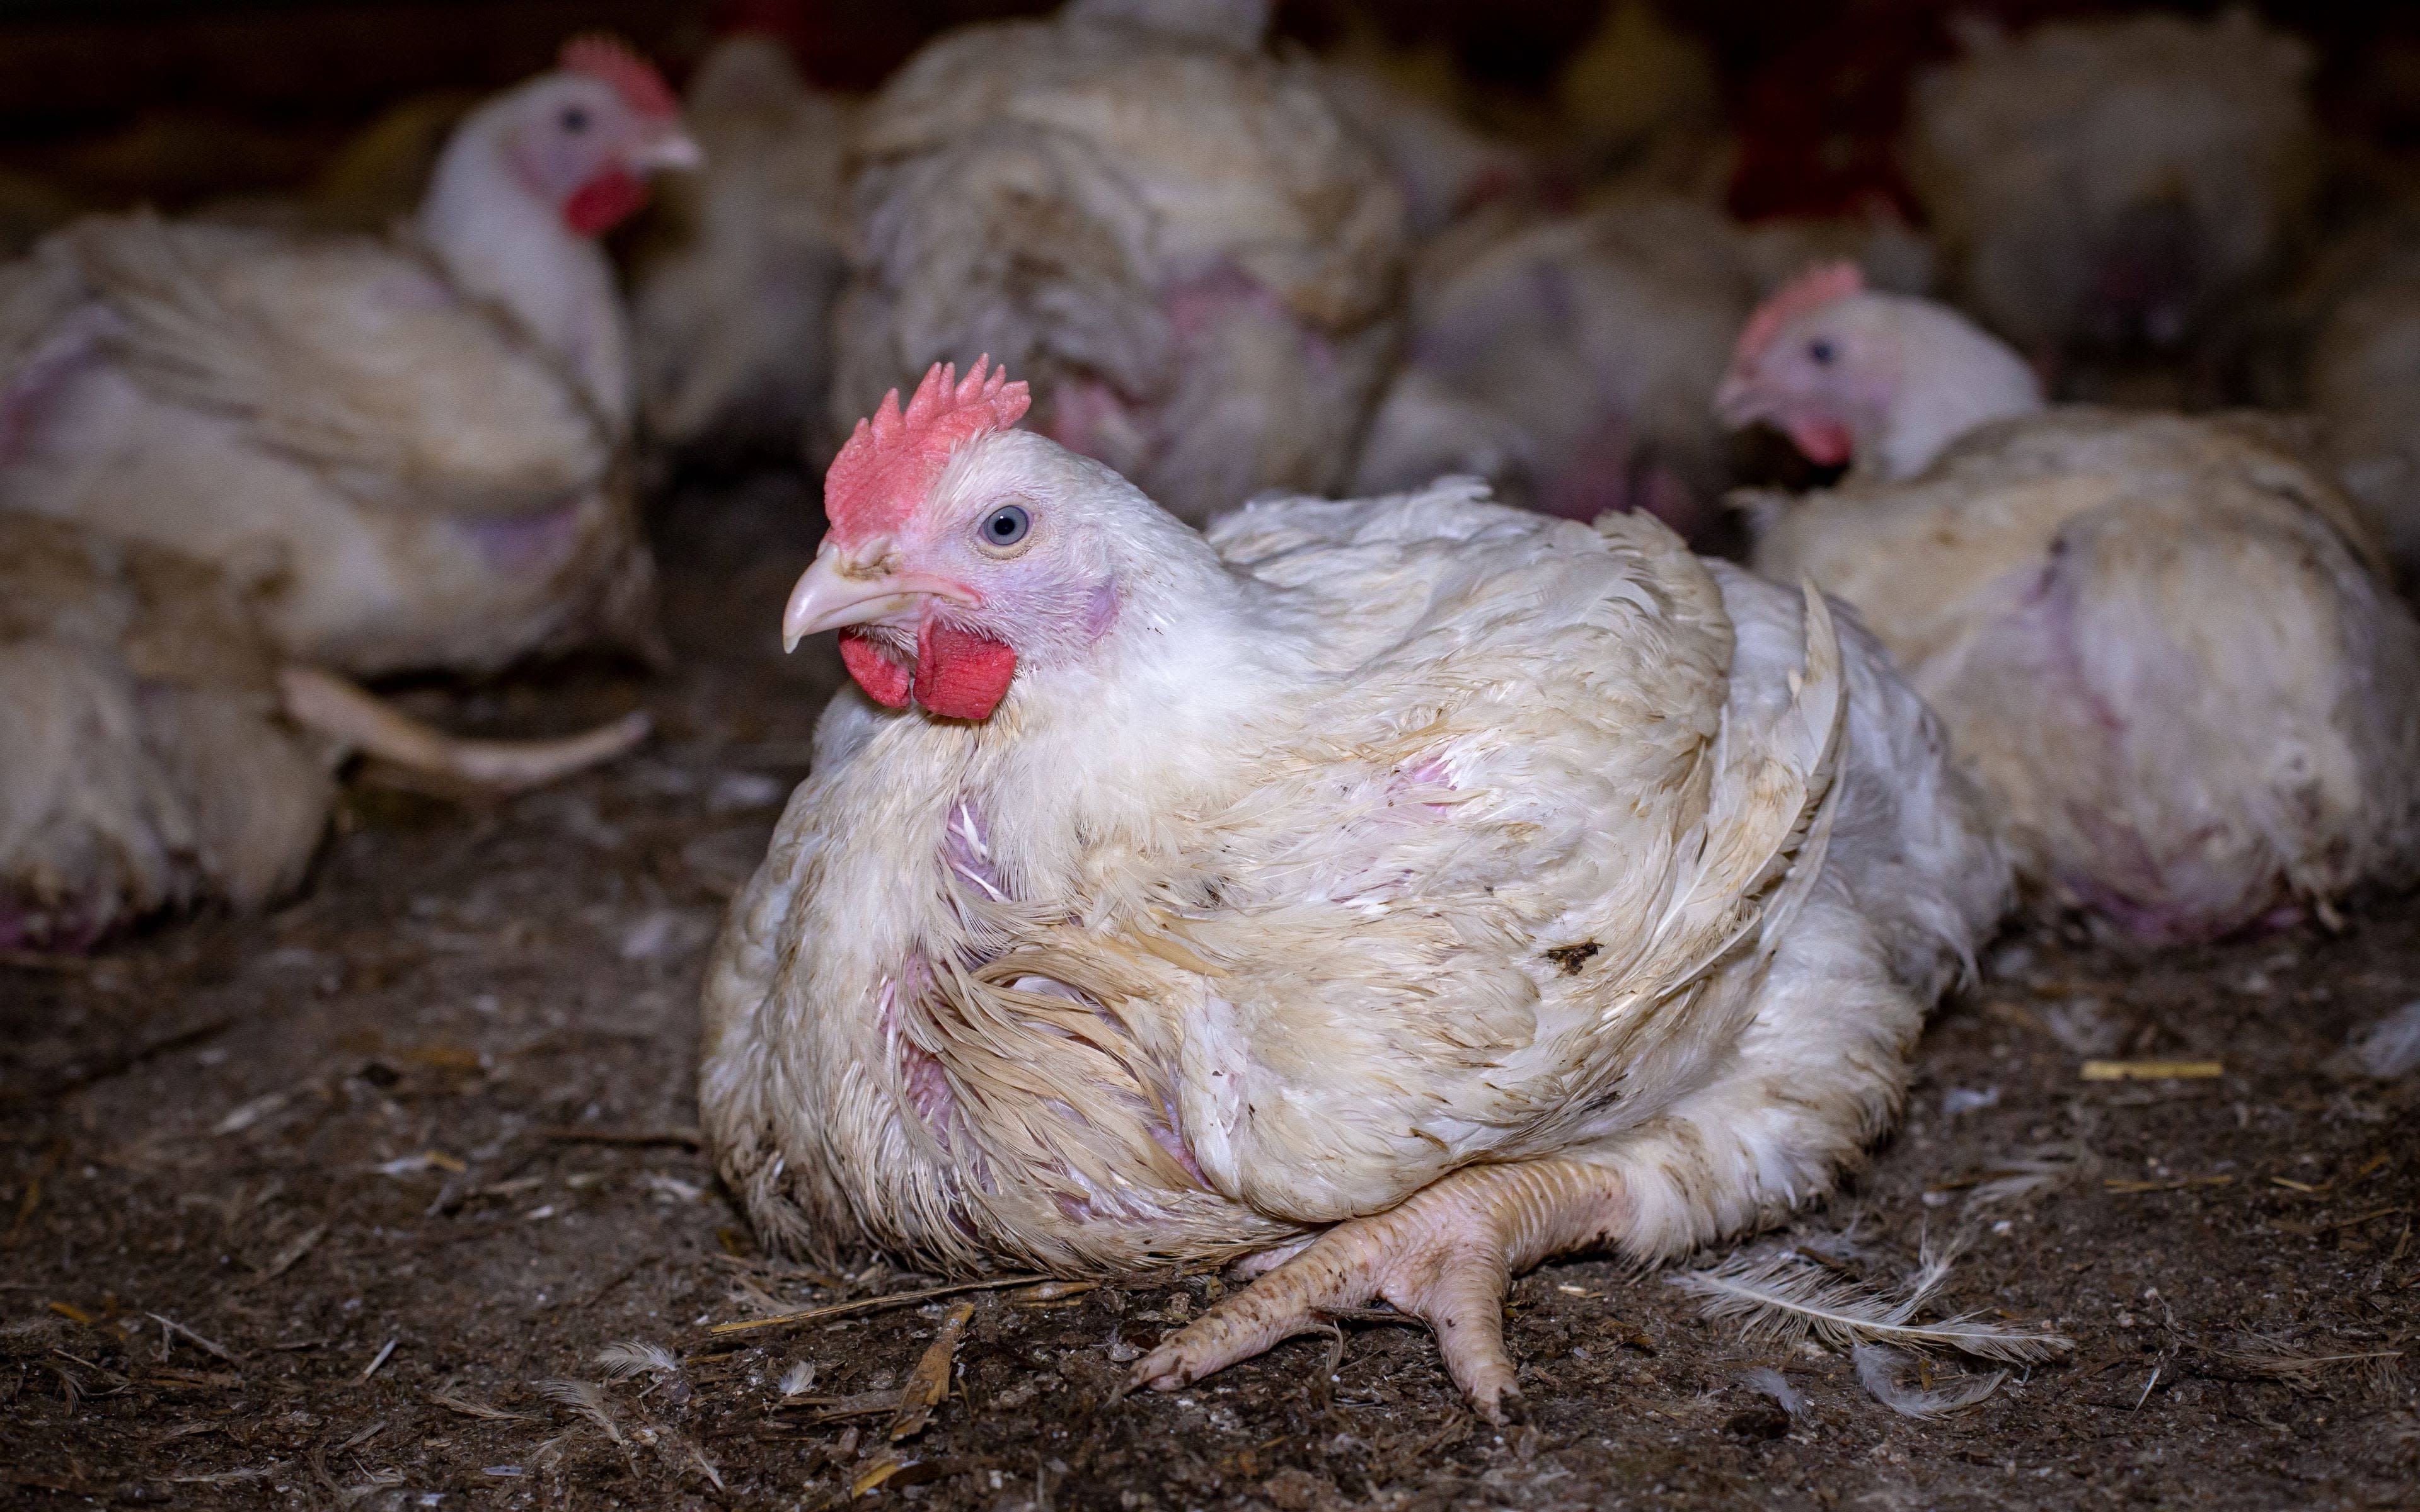 Justice for chickens: the culmination of a three year battle